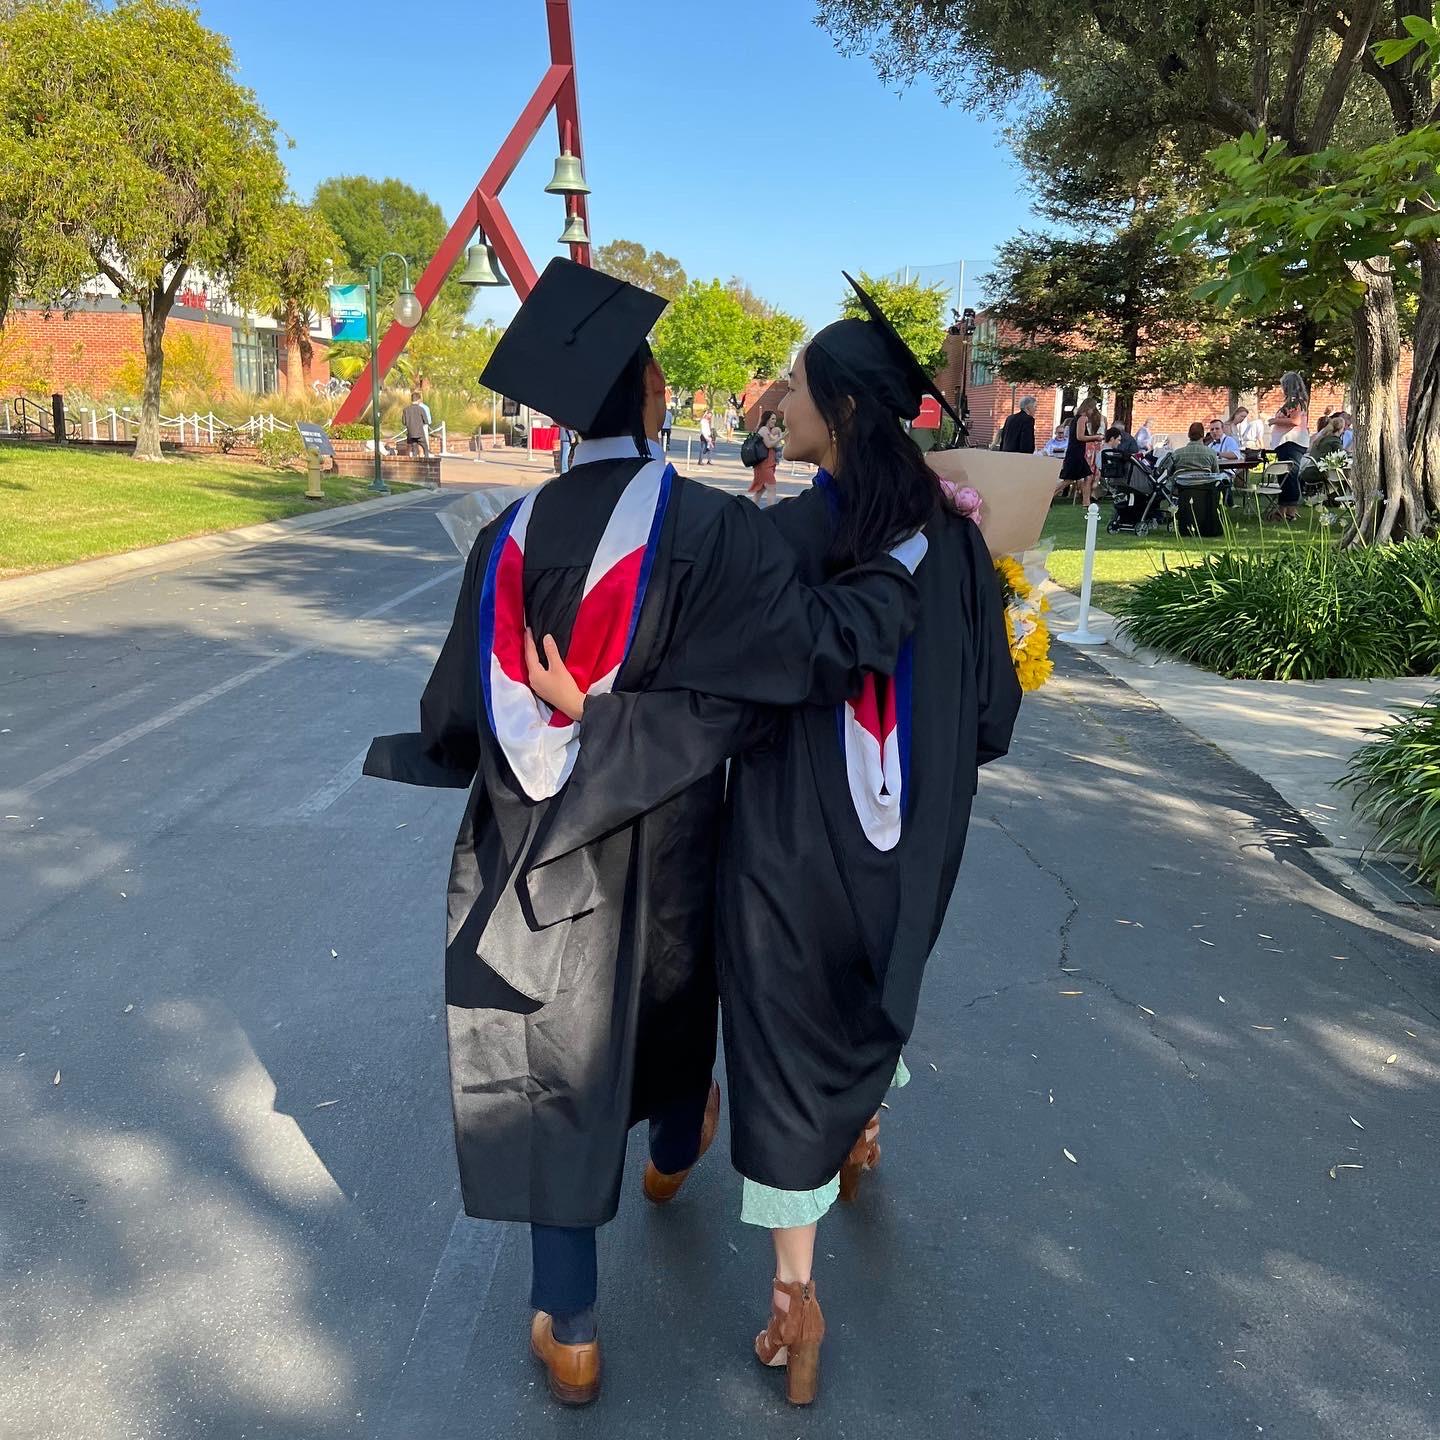 We got our Masters degrees... and now off to our Ph.D.s!